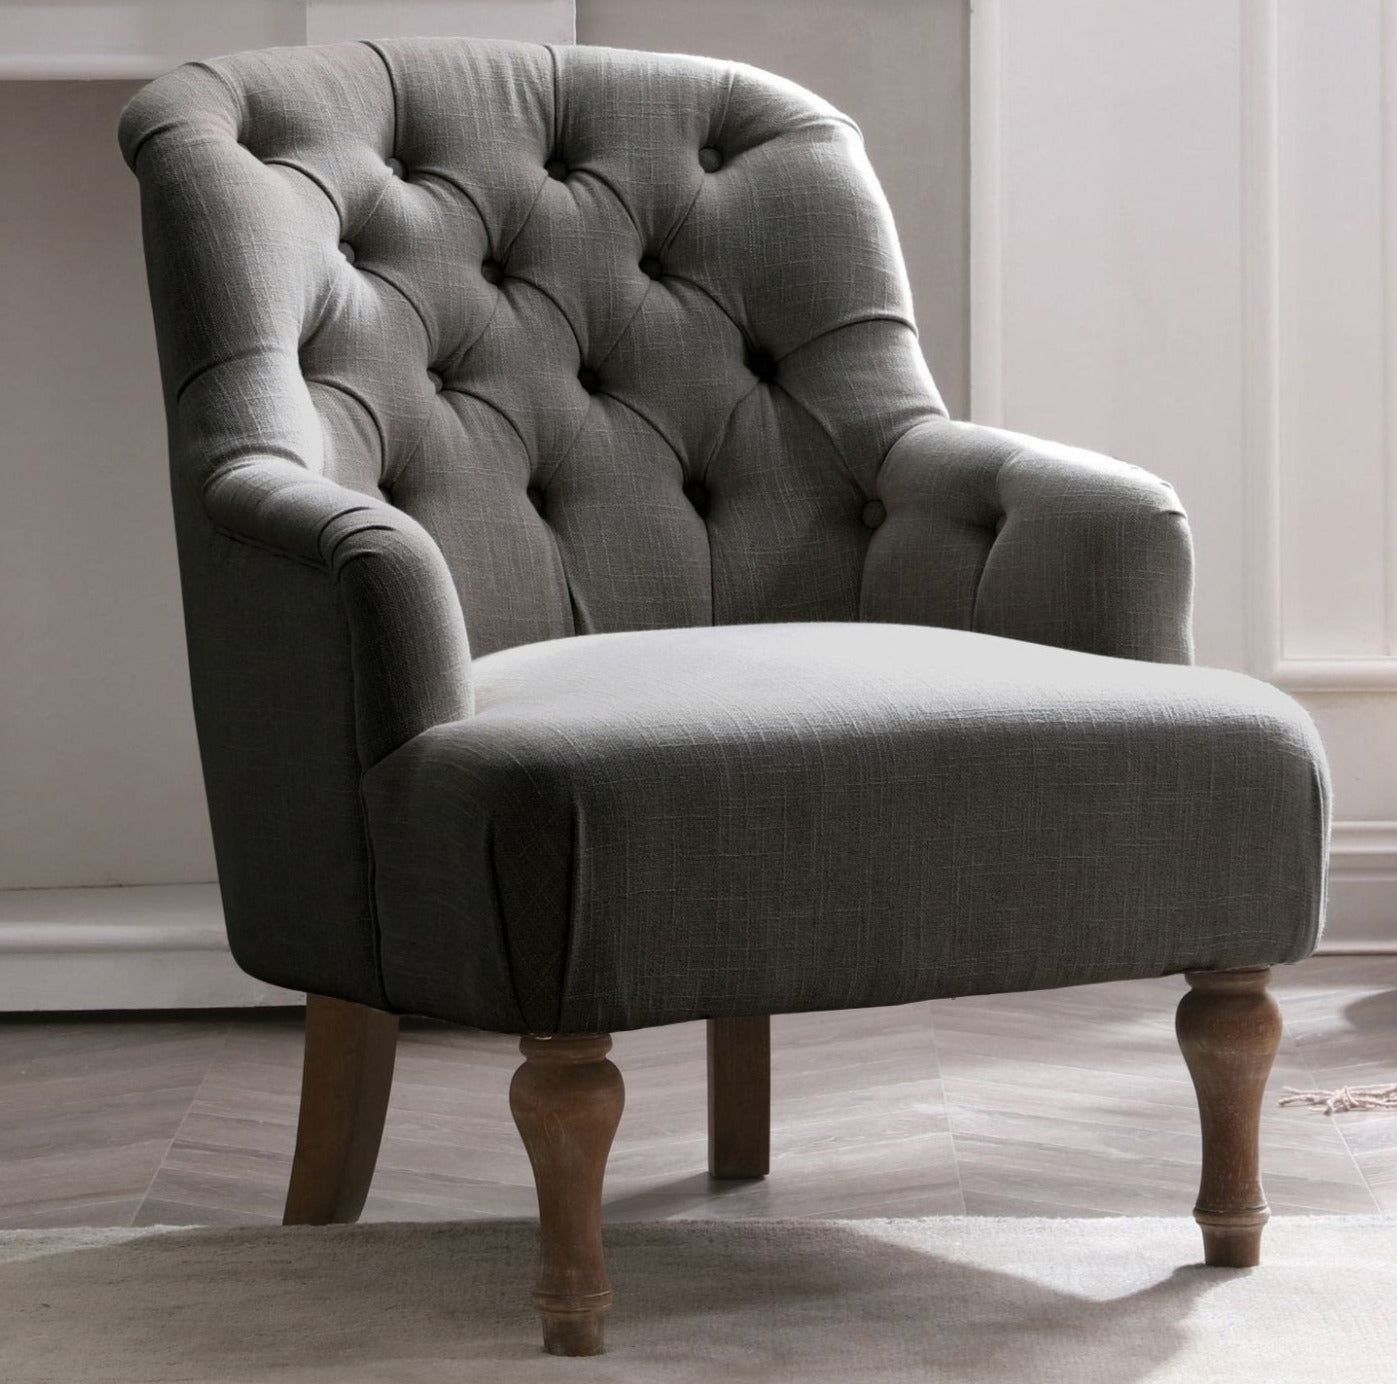 Bianca Chair in Charcoal in room setting